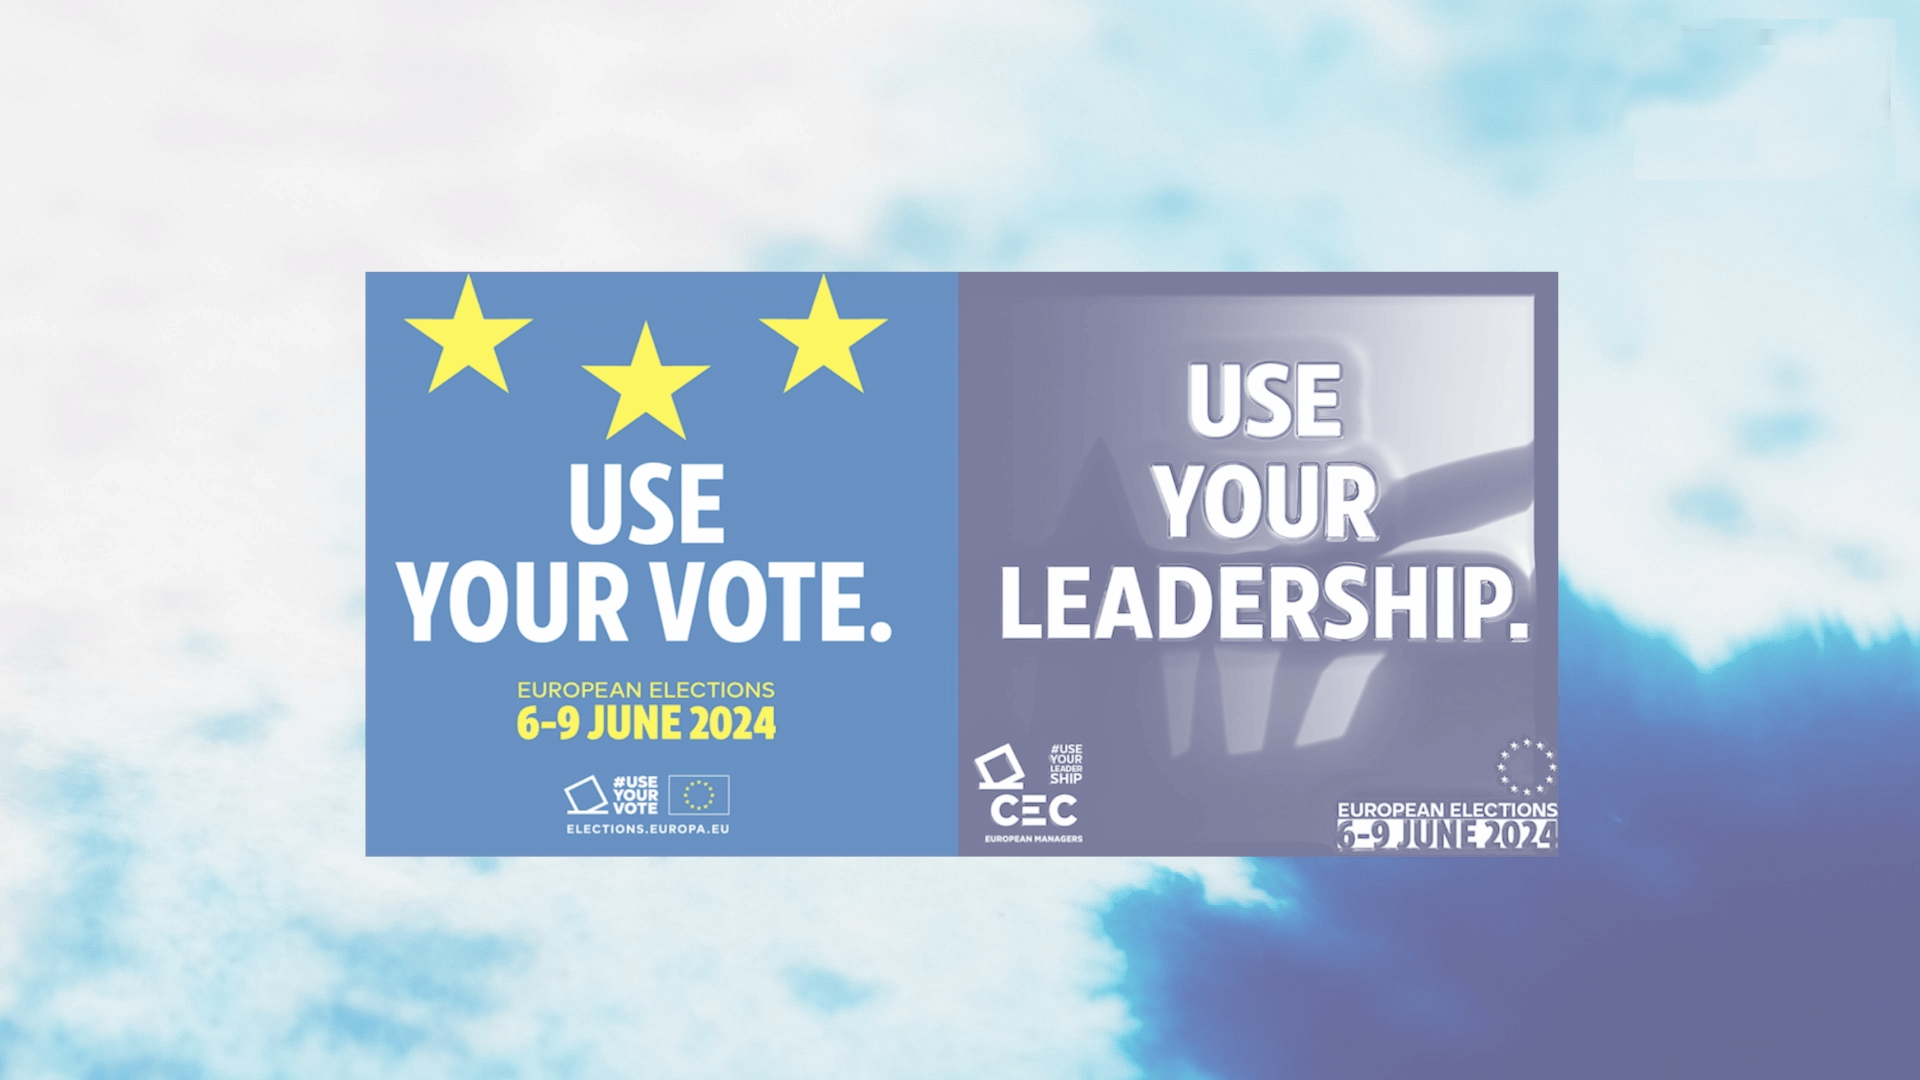 Use Your Leadership - EU Elections campaign for EU Managers